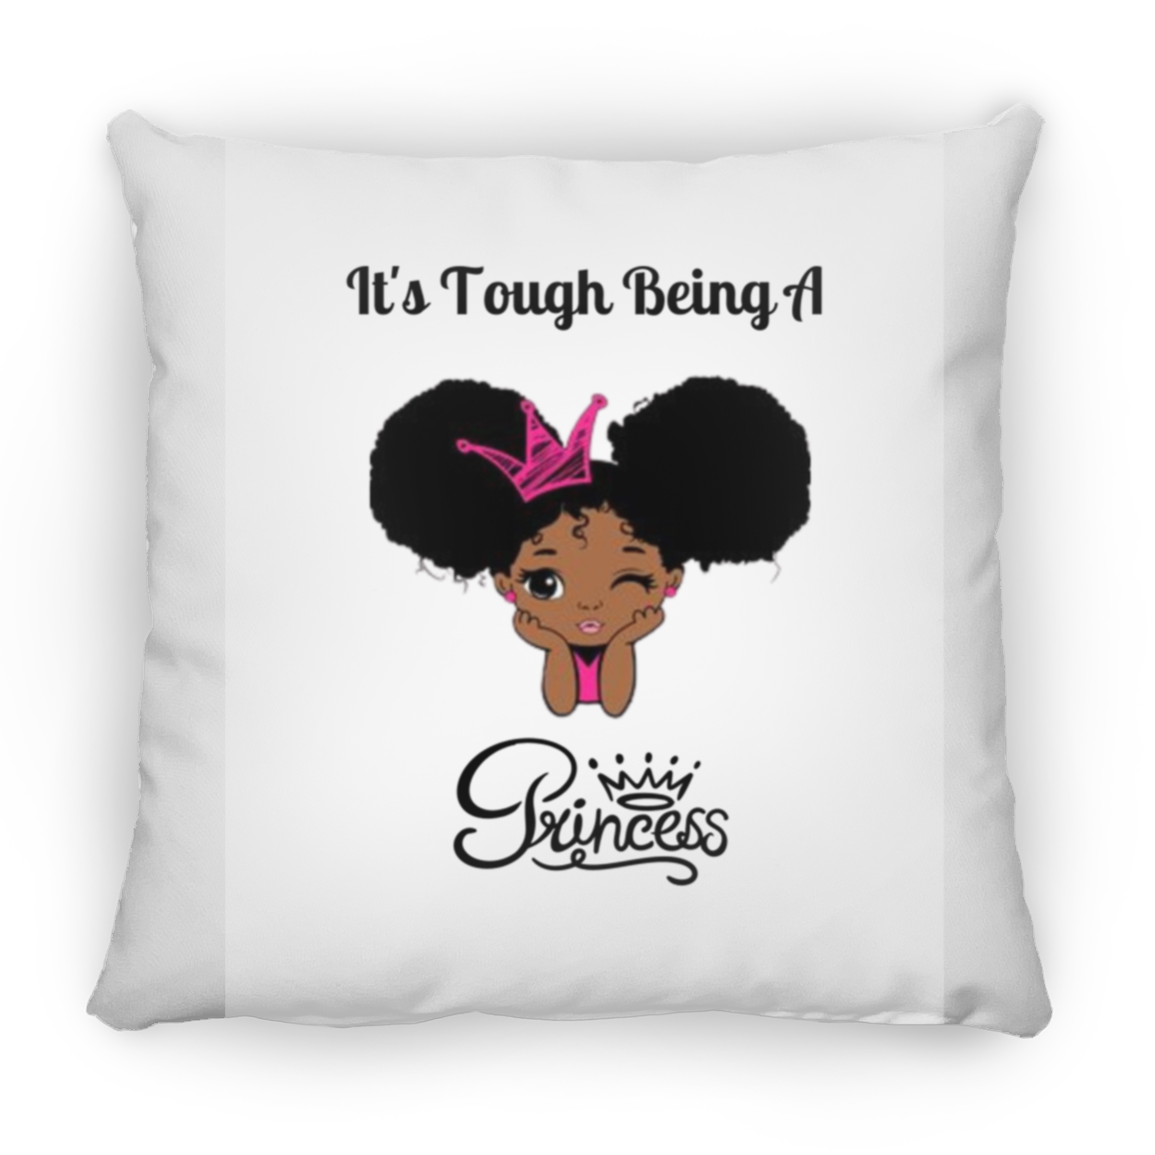 It's Tough Being A Princess Large Square Pillow